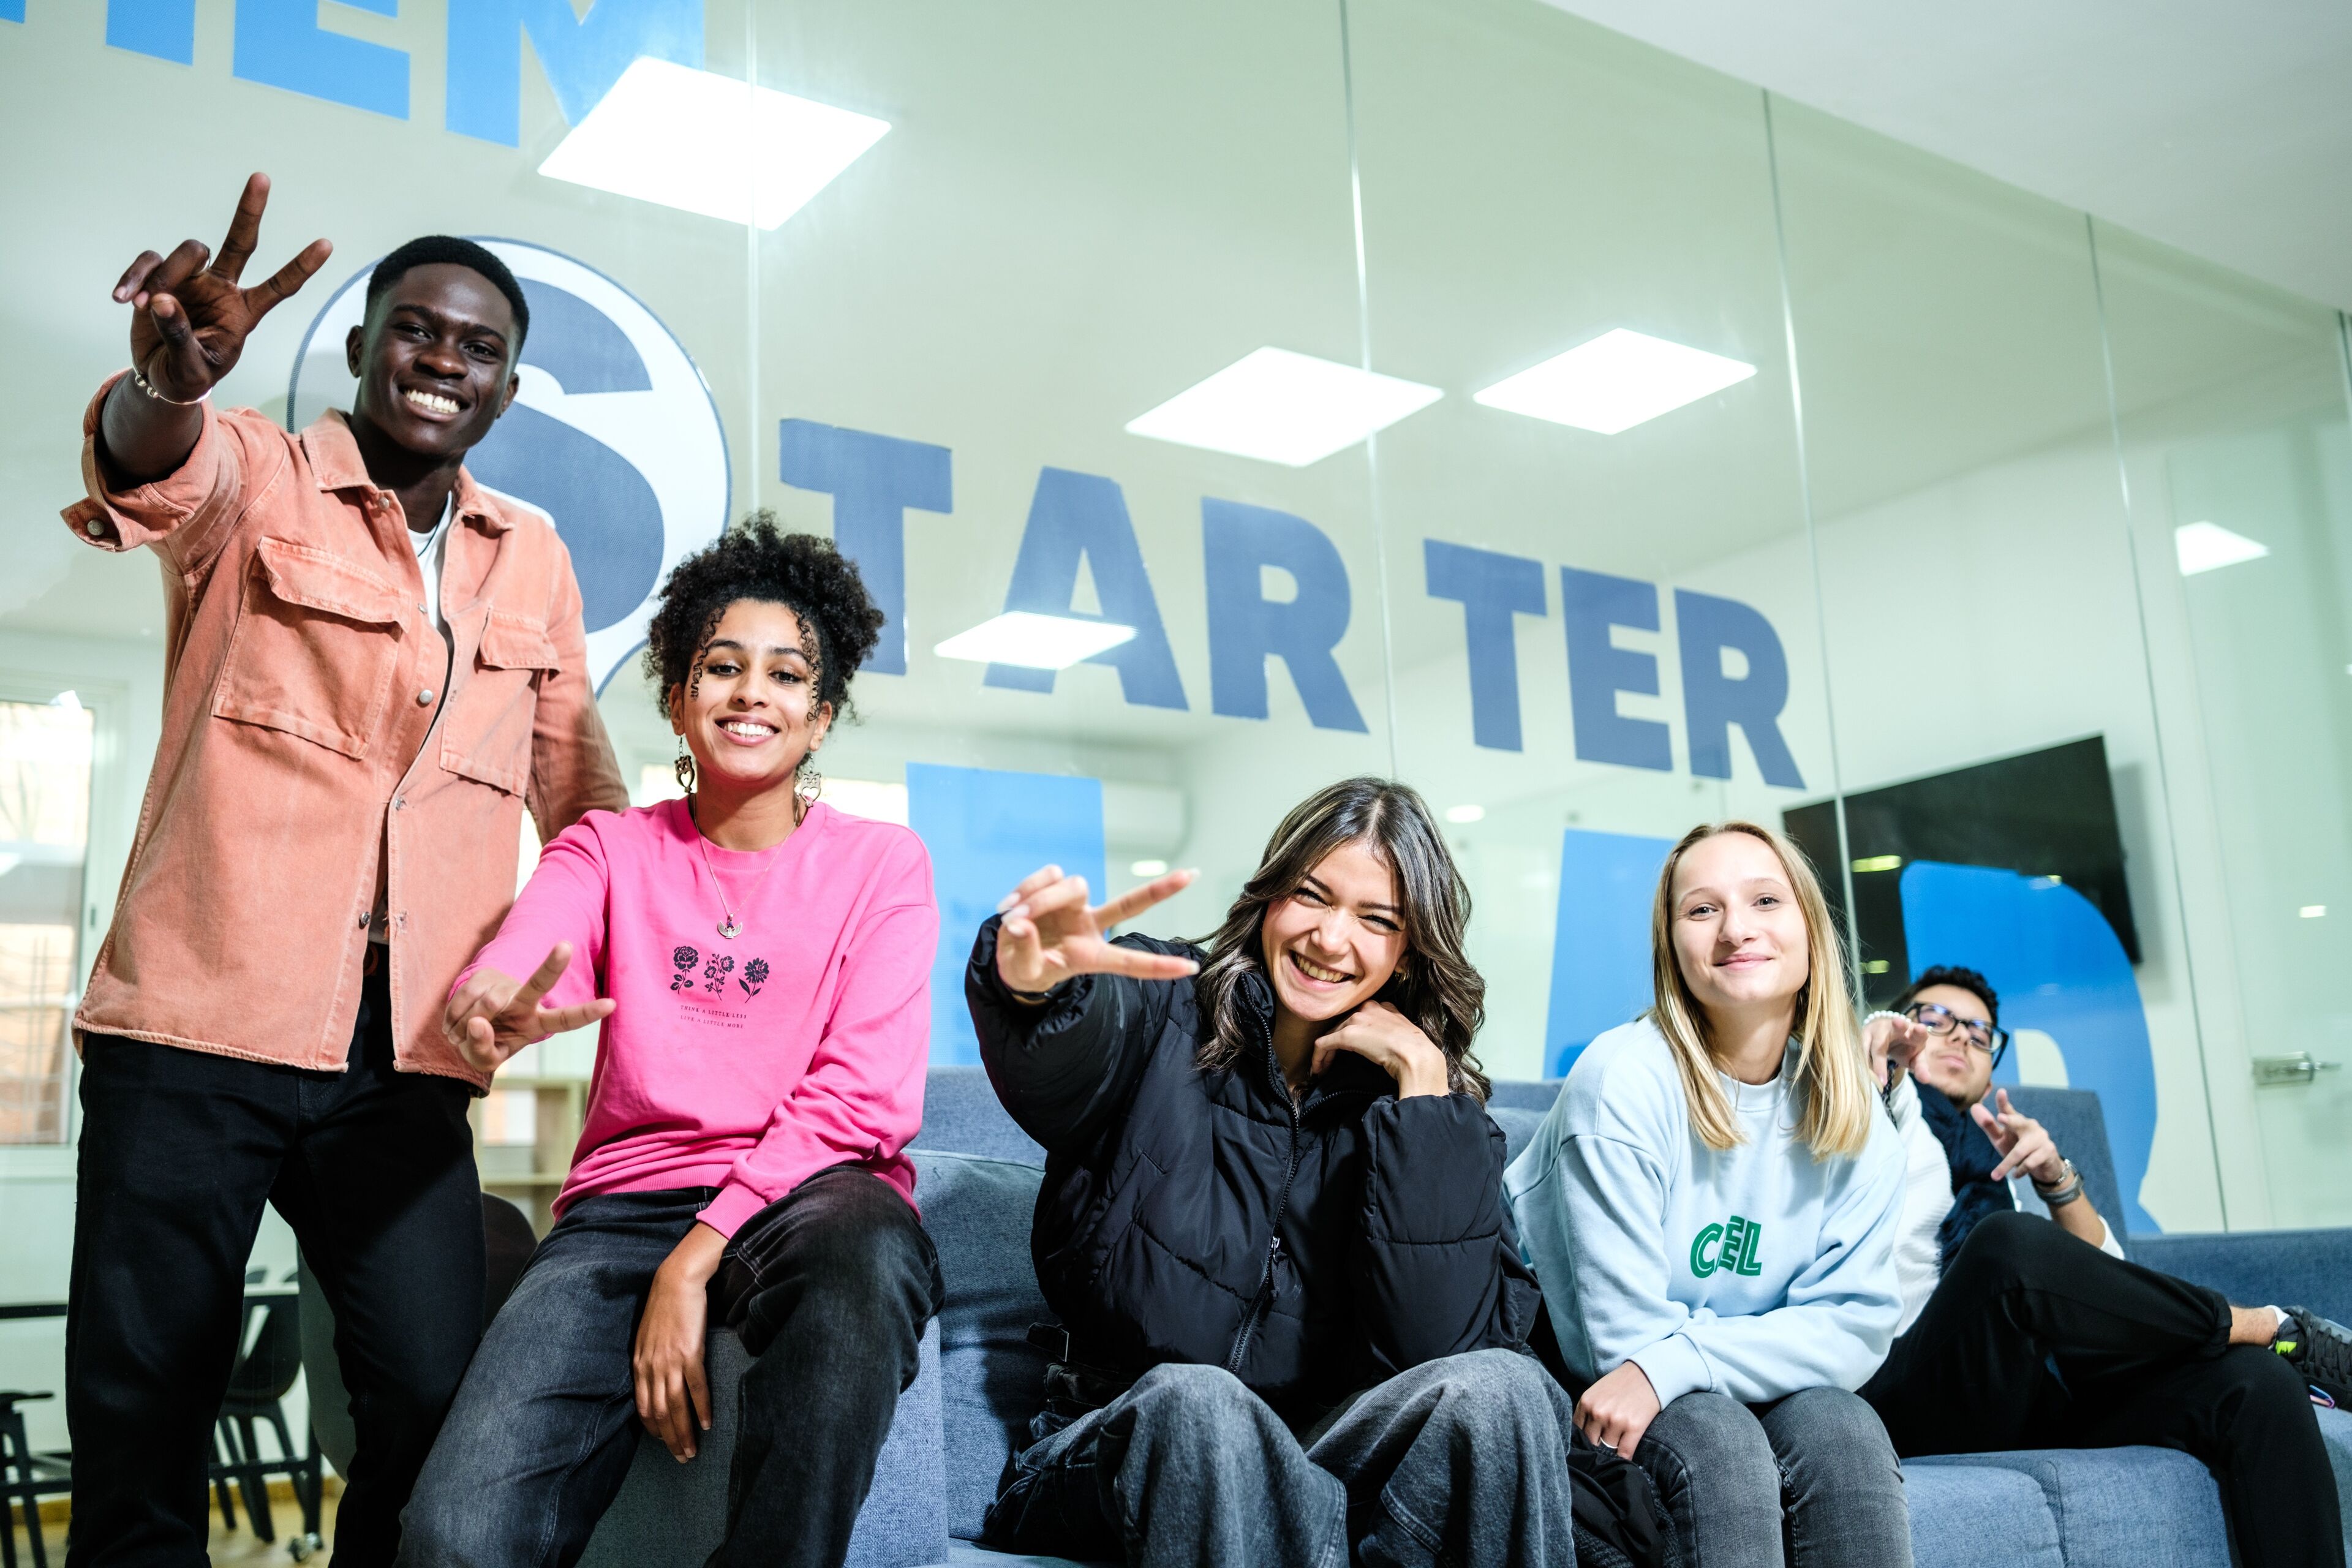 A diverse group of young adults posing with playful hand gestures in a modern startup office environment.